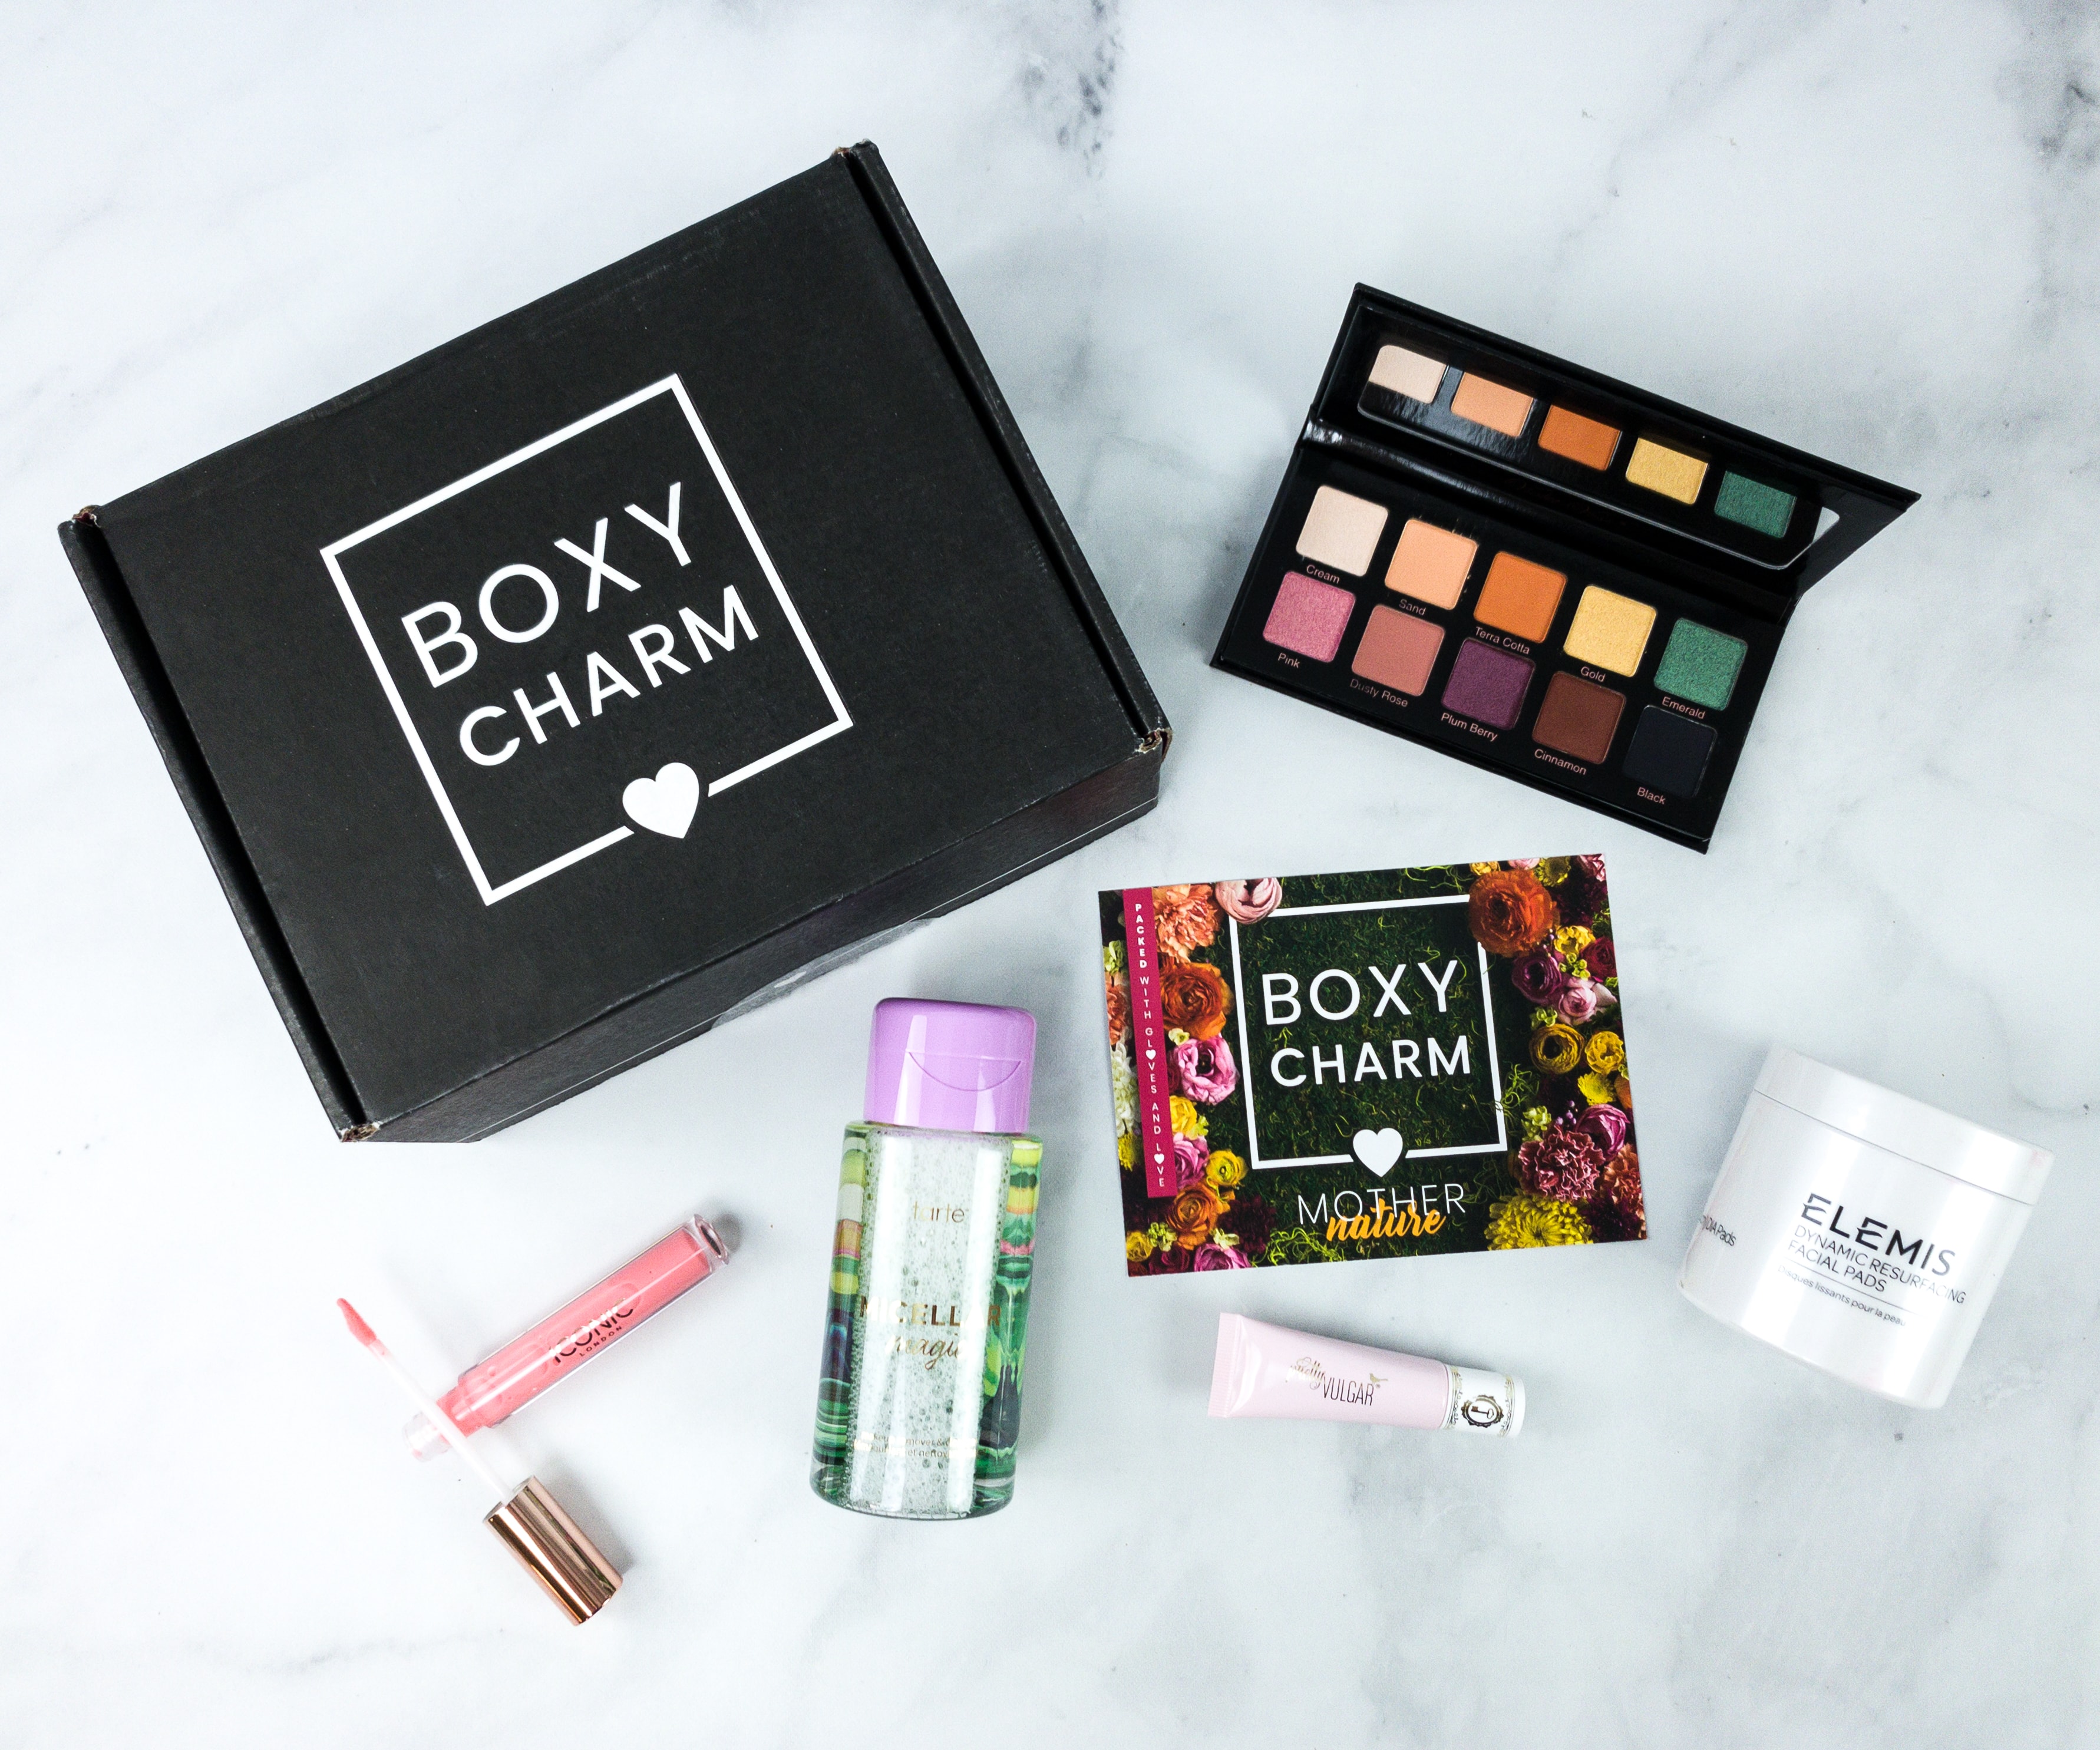 BOXYCHARM Reviews Get All The Details At Hello Subscription!